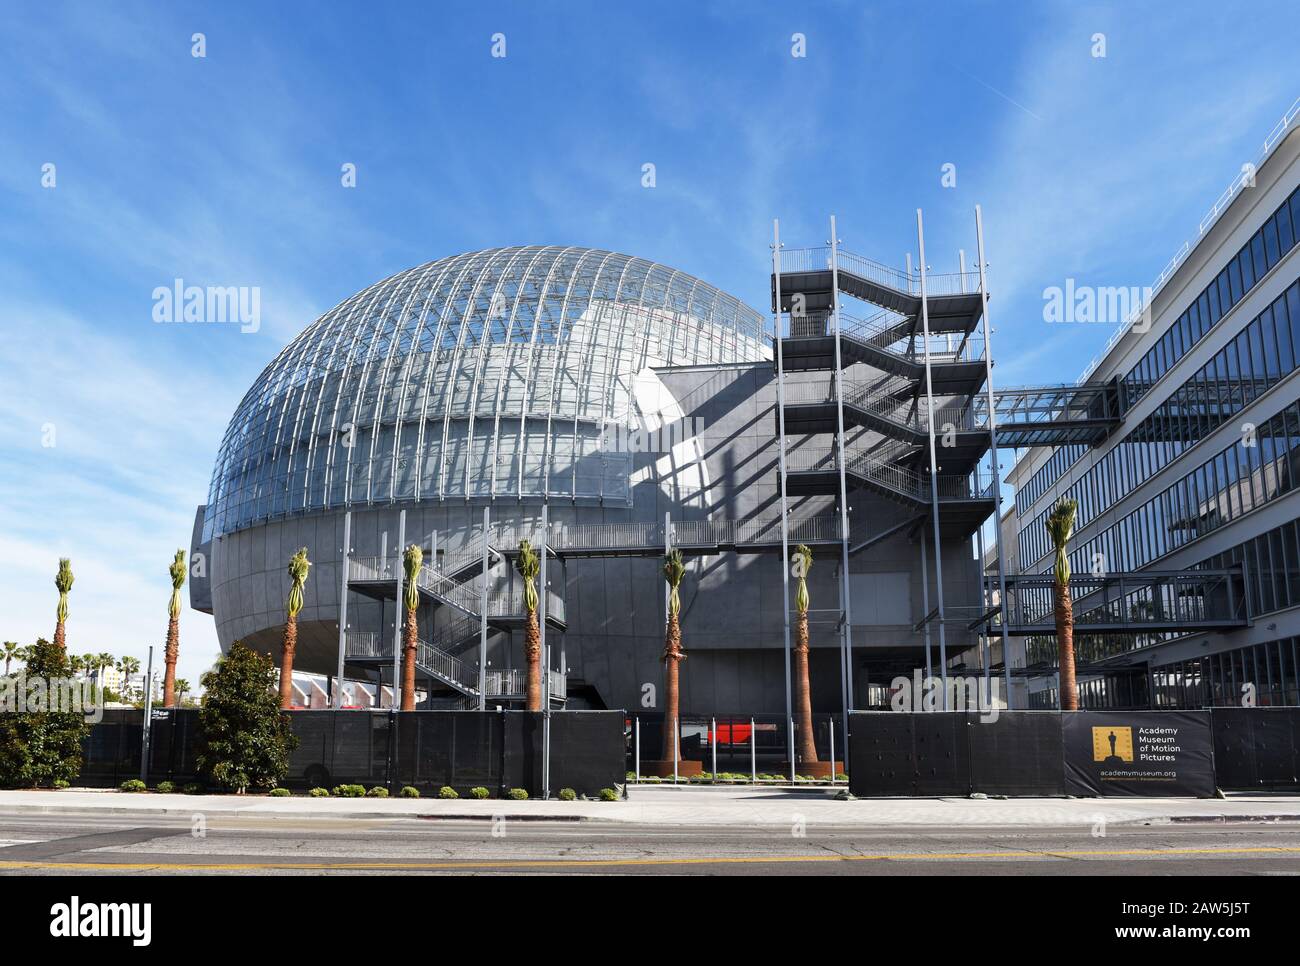 LOS ANGELES, CALIFORNIA - 05 FEB 2020: Construction at the Academy Museum of Motion Pictures at the intersection of Fairfax Avenue and Wilshire Boulev Stock Photo